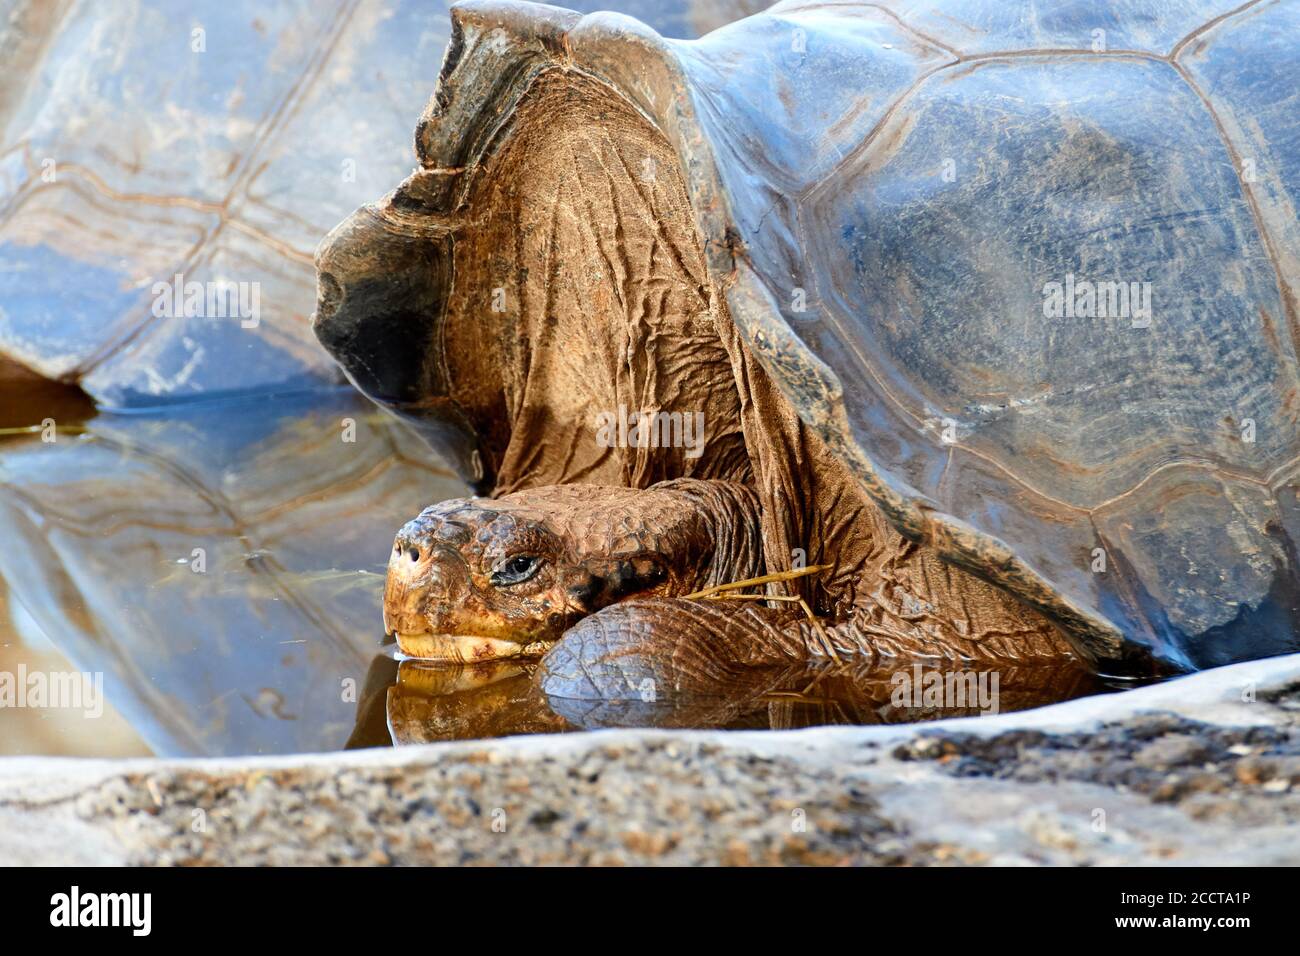 Giant turtle relaxing in the water at the Charles Darwin Research Center, Galapagos, Ecuador Stock Photo